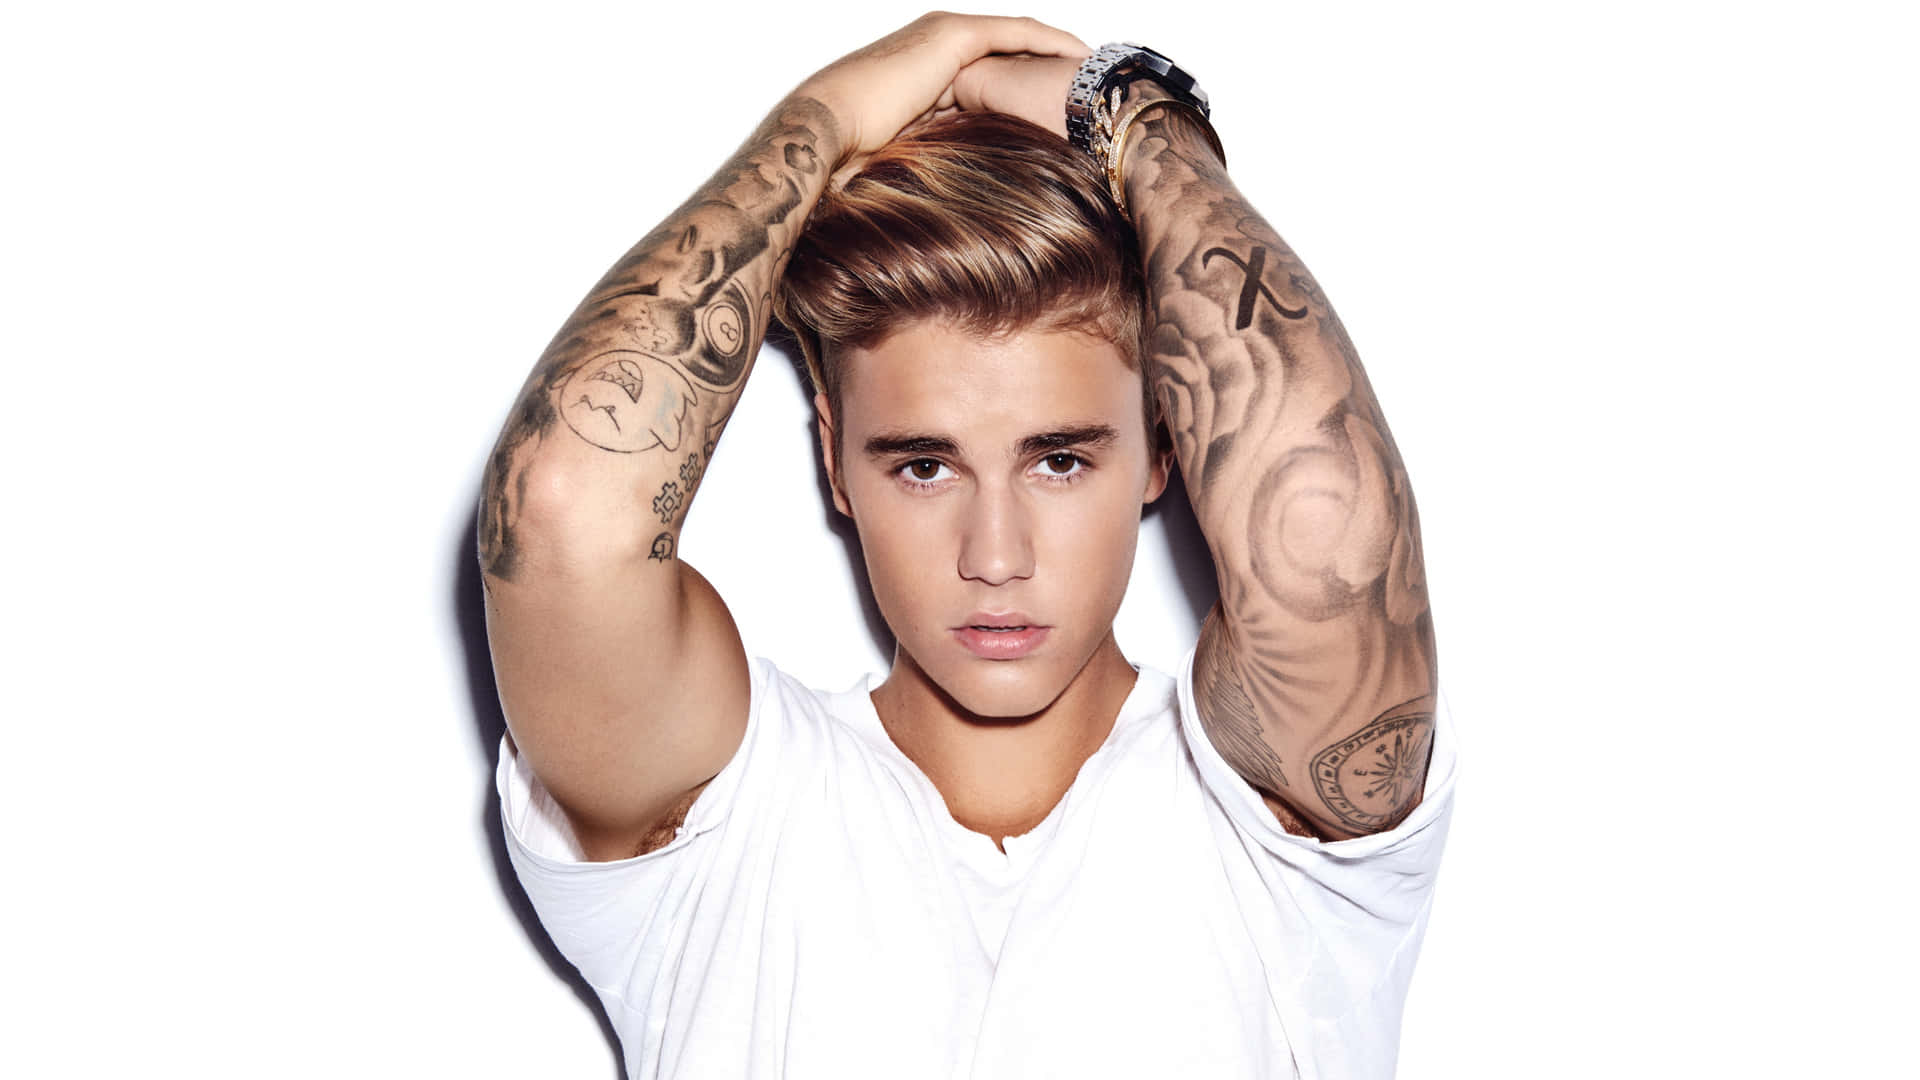 Justin Bieber looks stylish and confident as he poses in 2021. Wallpaper